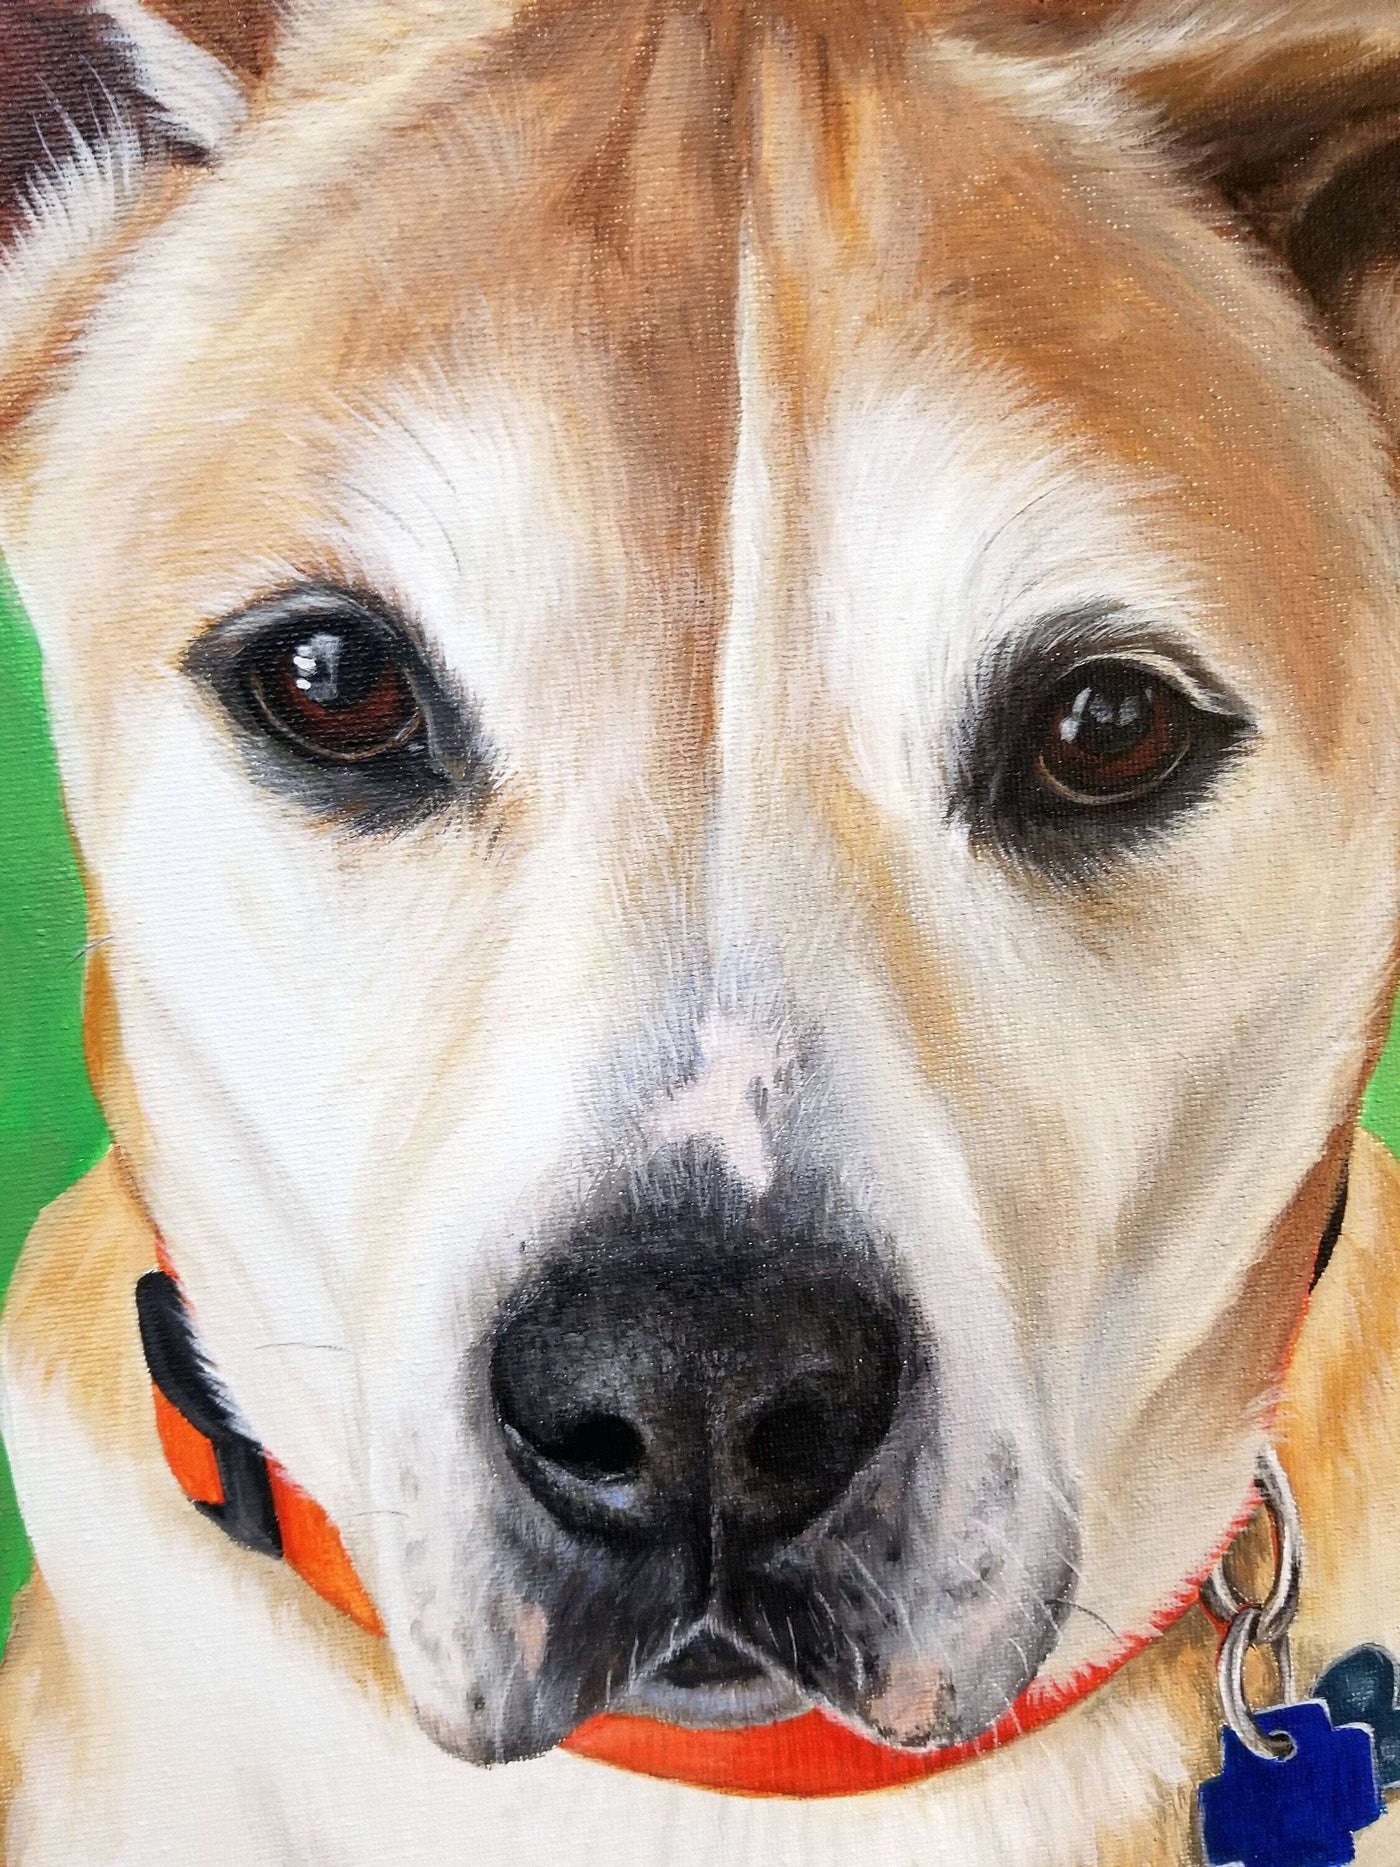 Close-up of a dog's face from a pet portrait painting, capturing the soulful eyes and detailing around the nose.